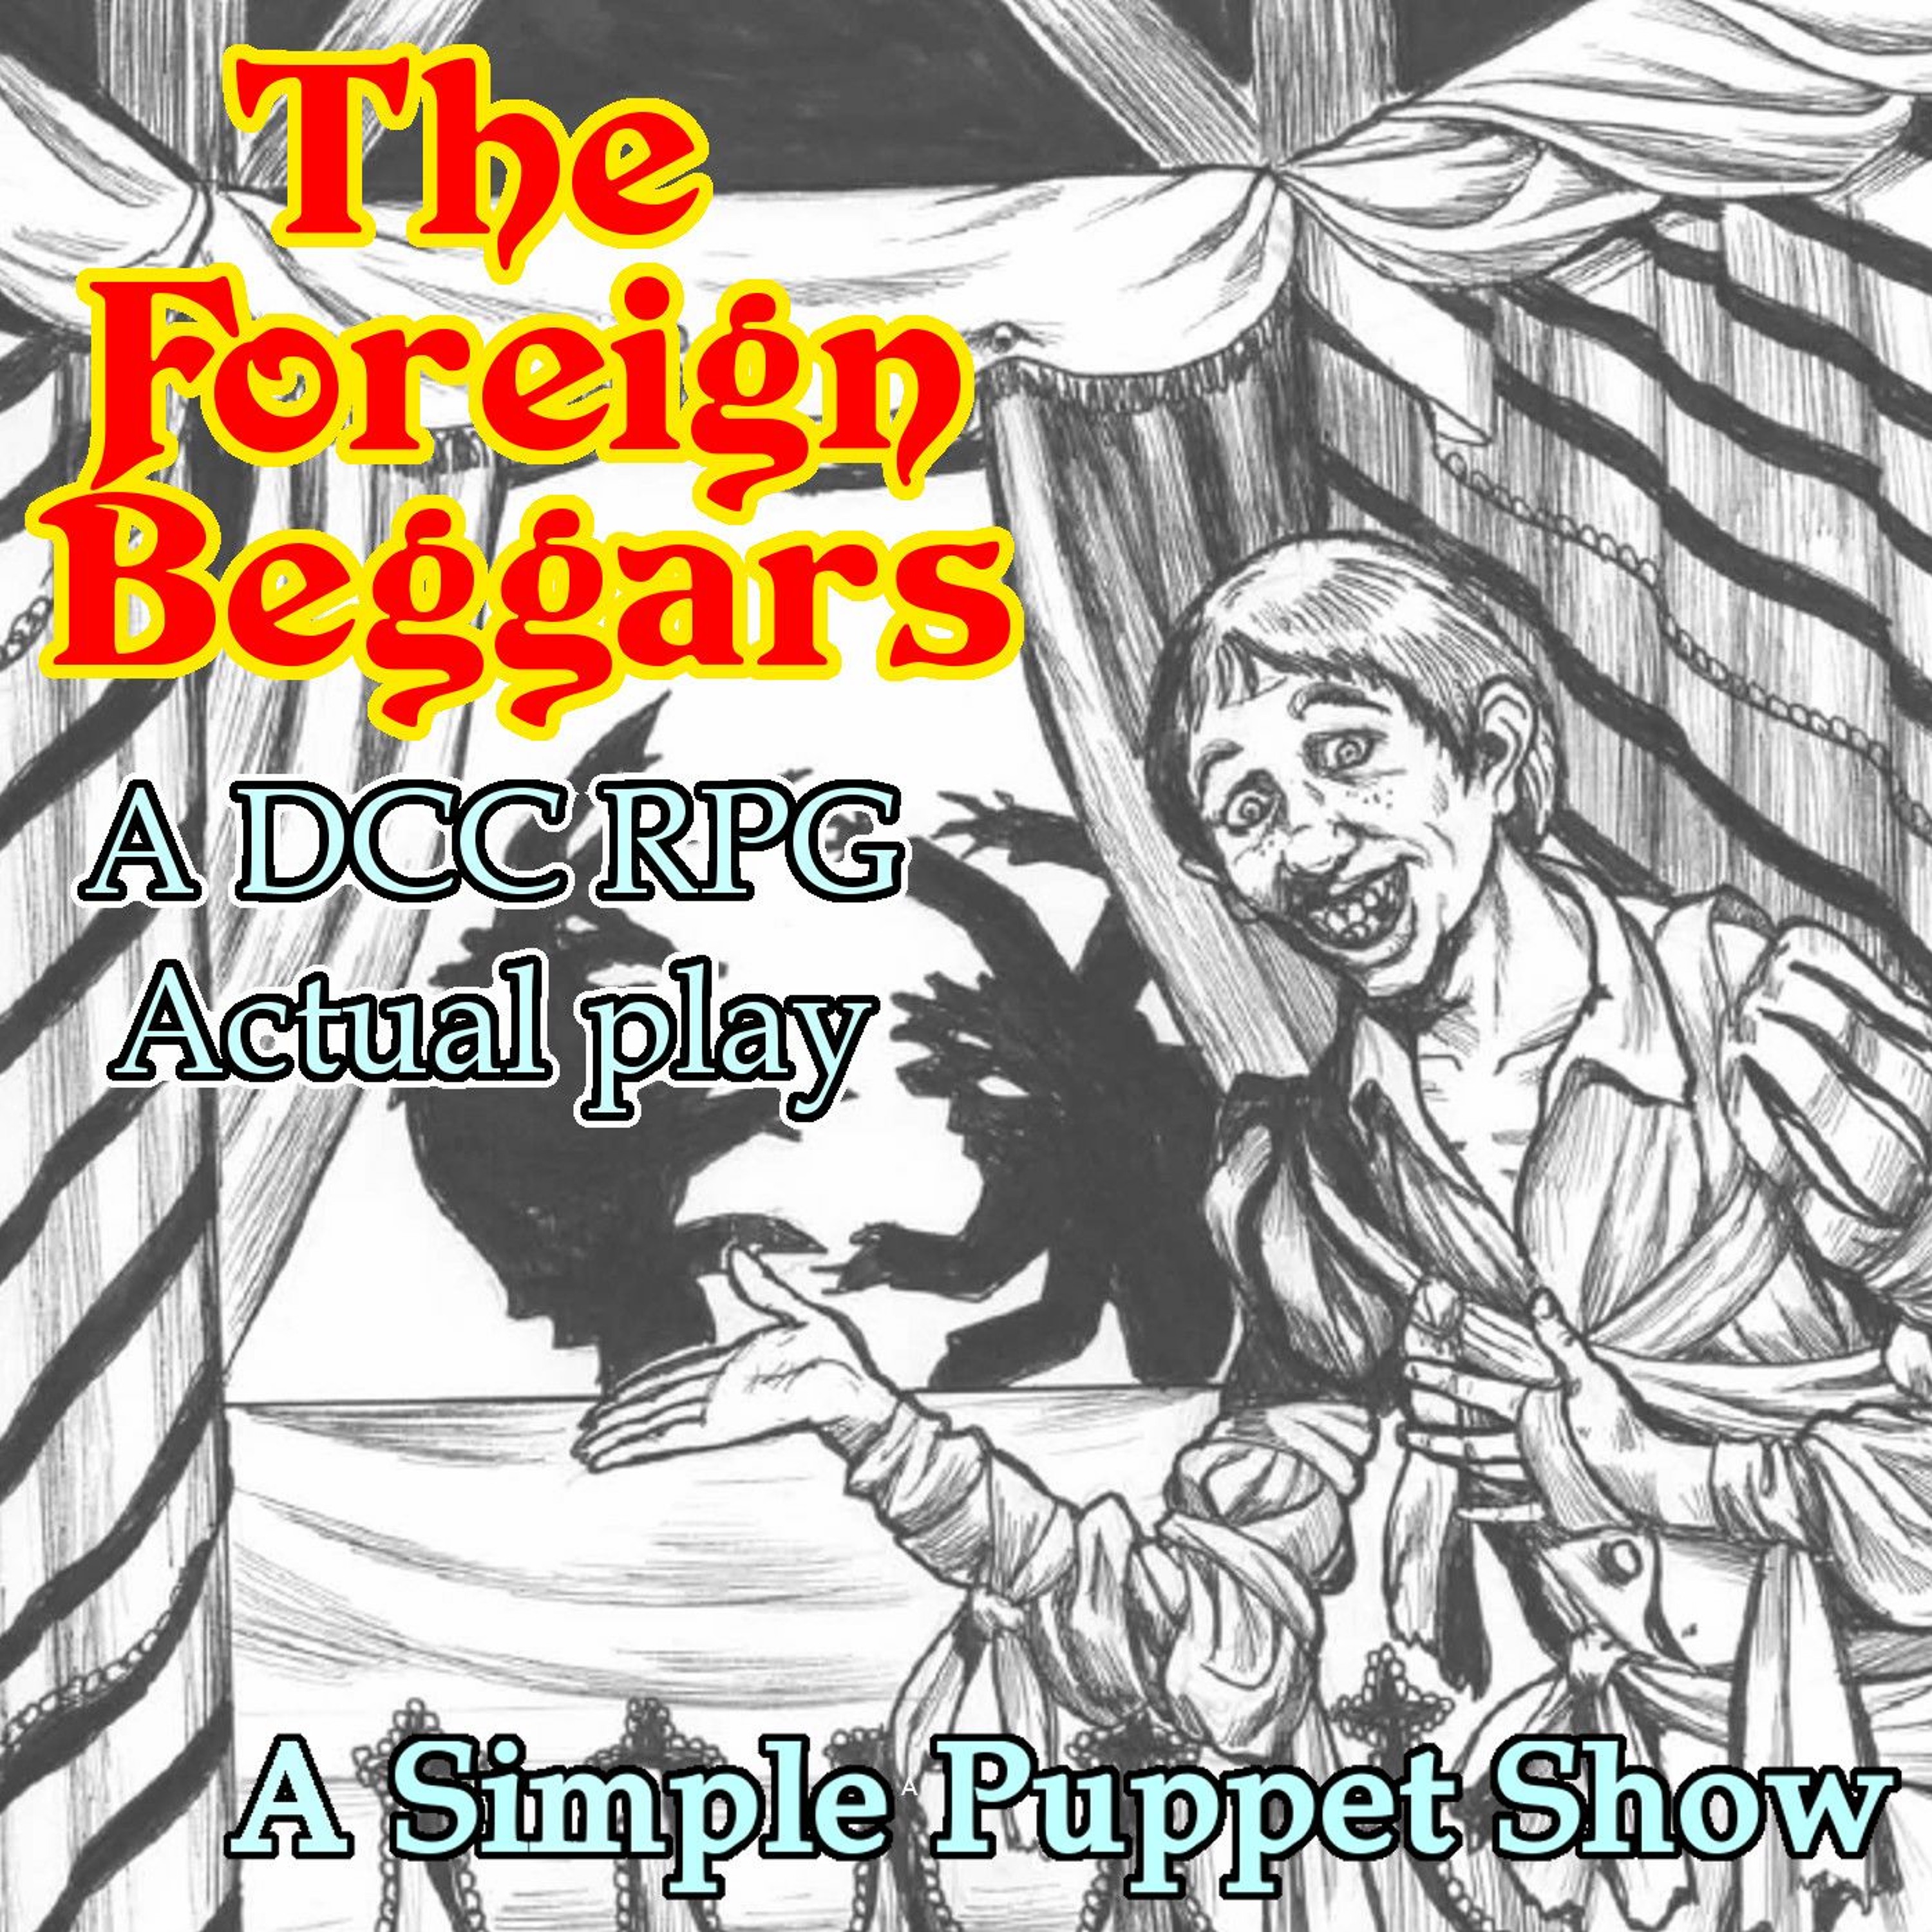 The Foreign Beggars 02 - A Simple Puppet Show (DCC RPG Actual Play)